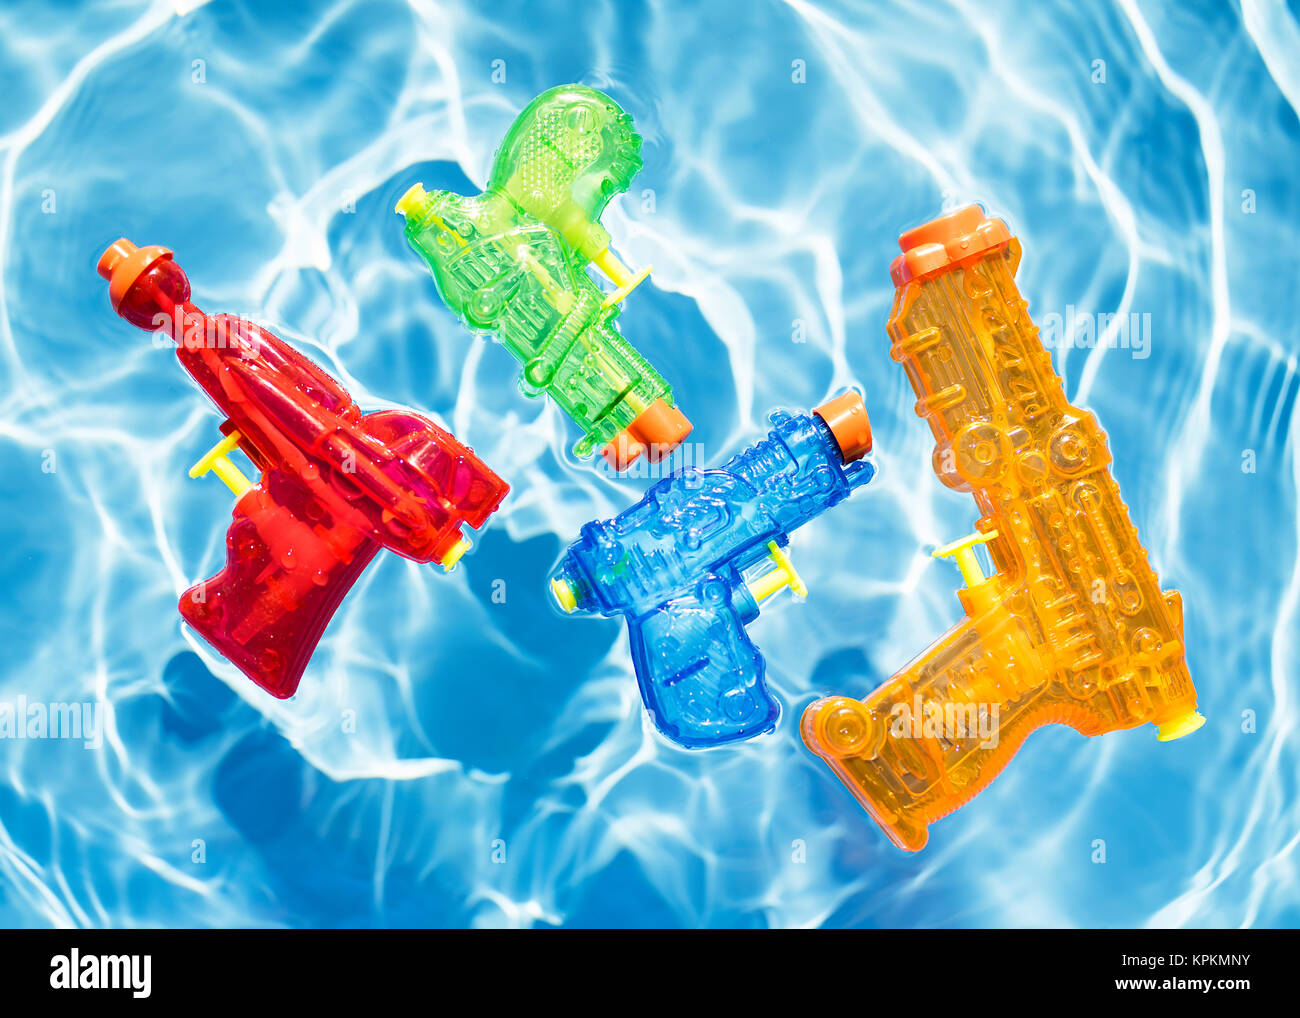 Four colorful squirt guns floating in water. Stock Photo